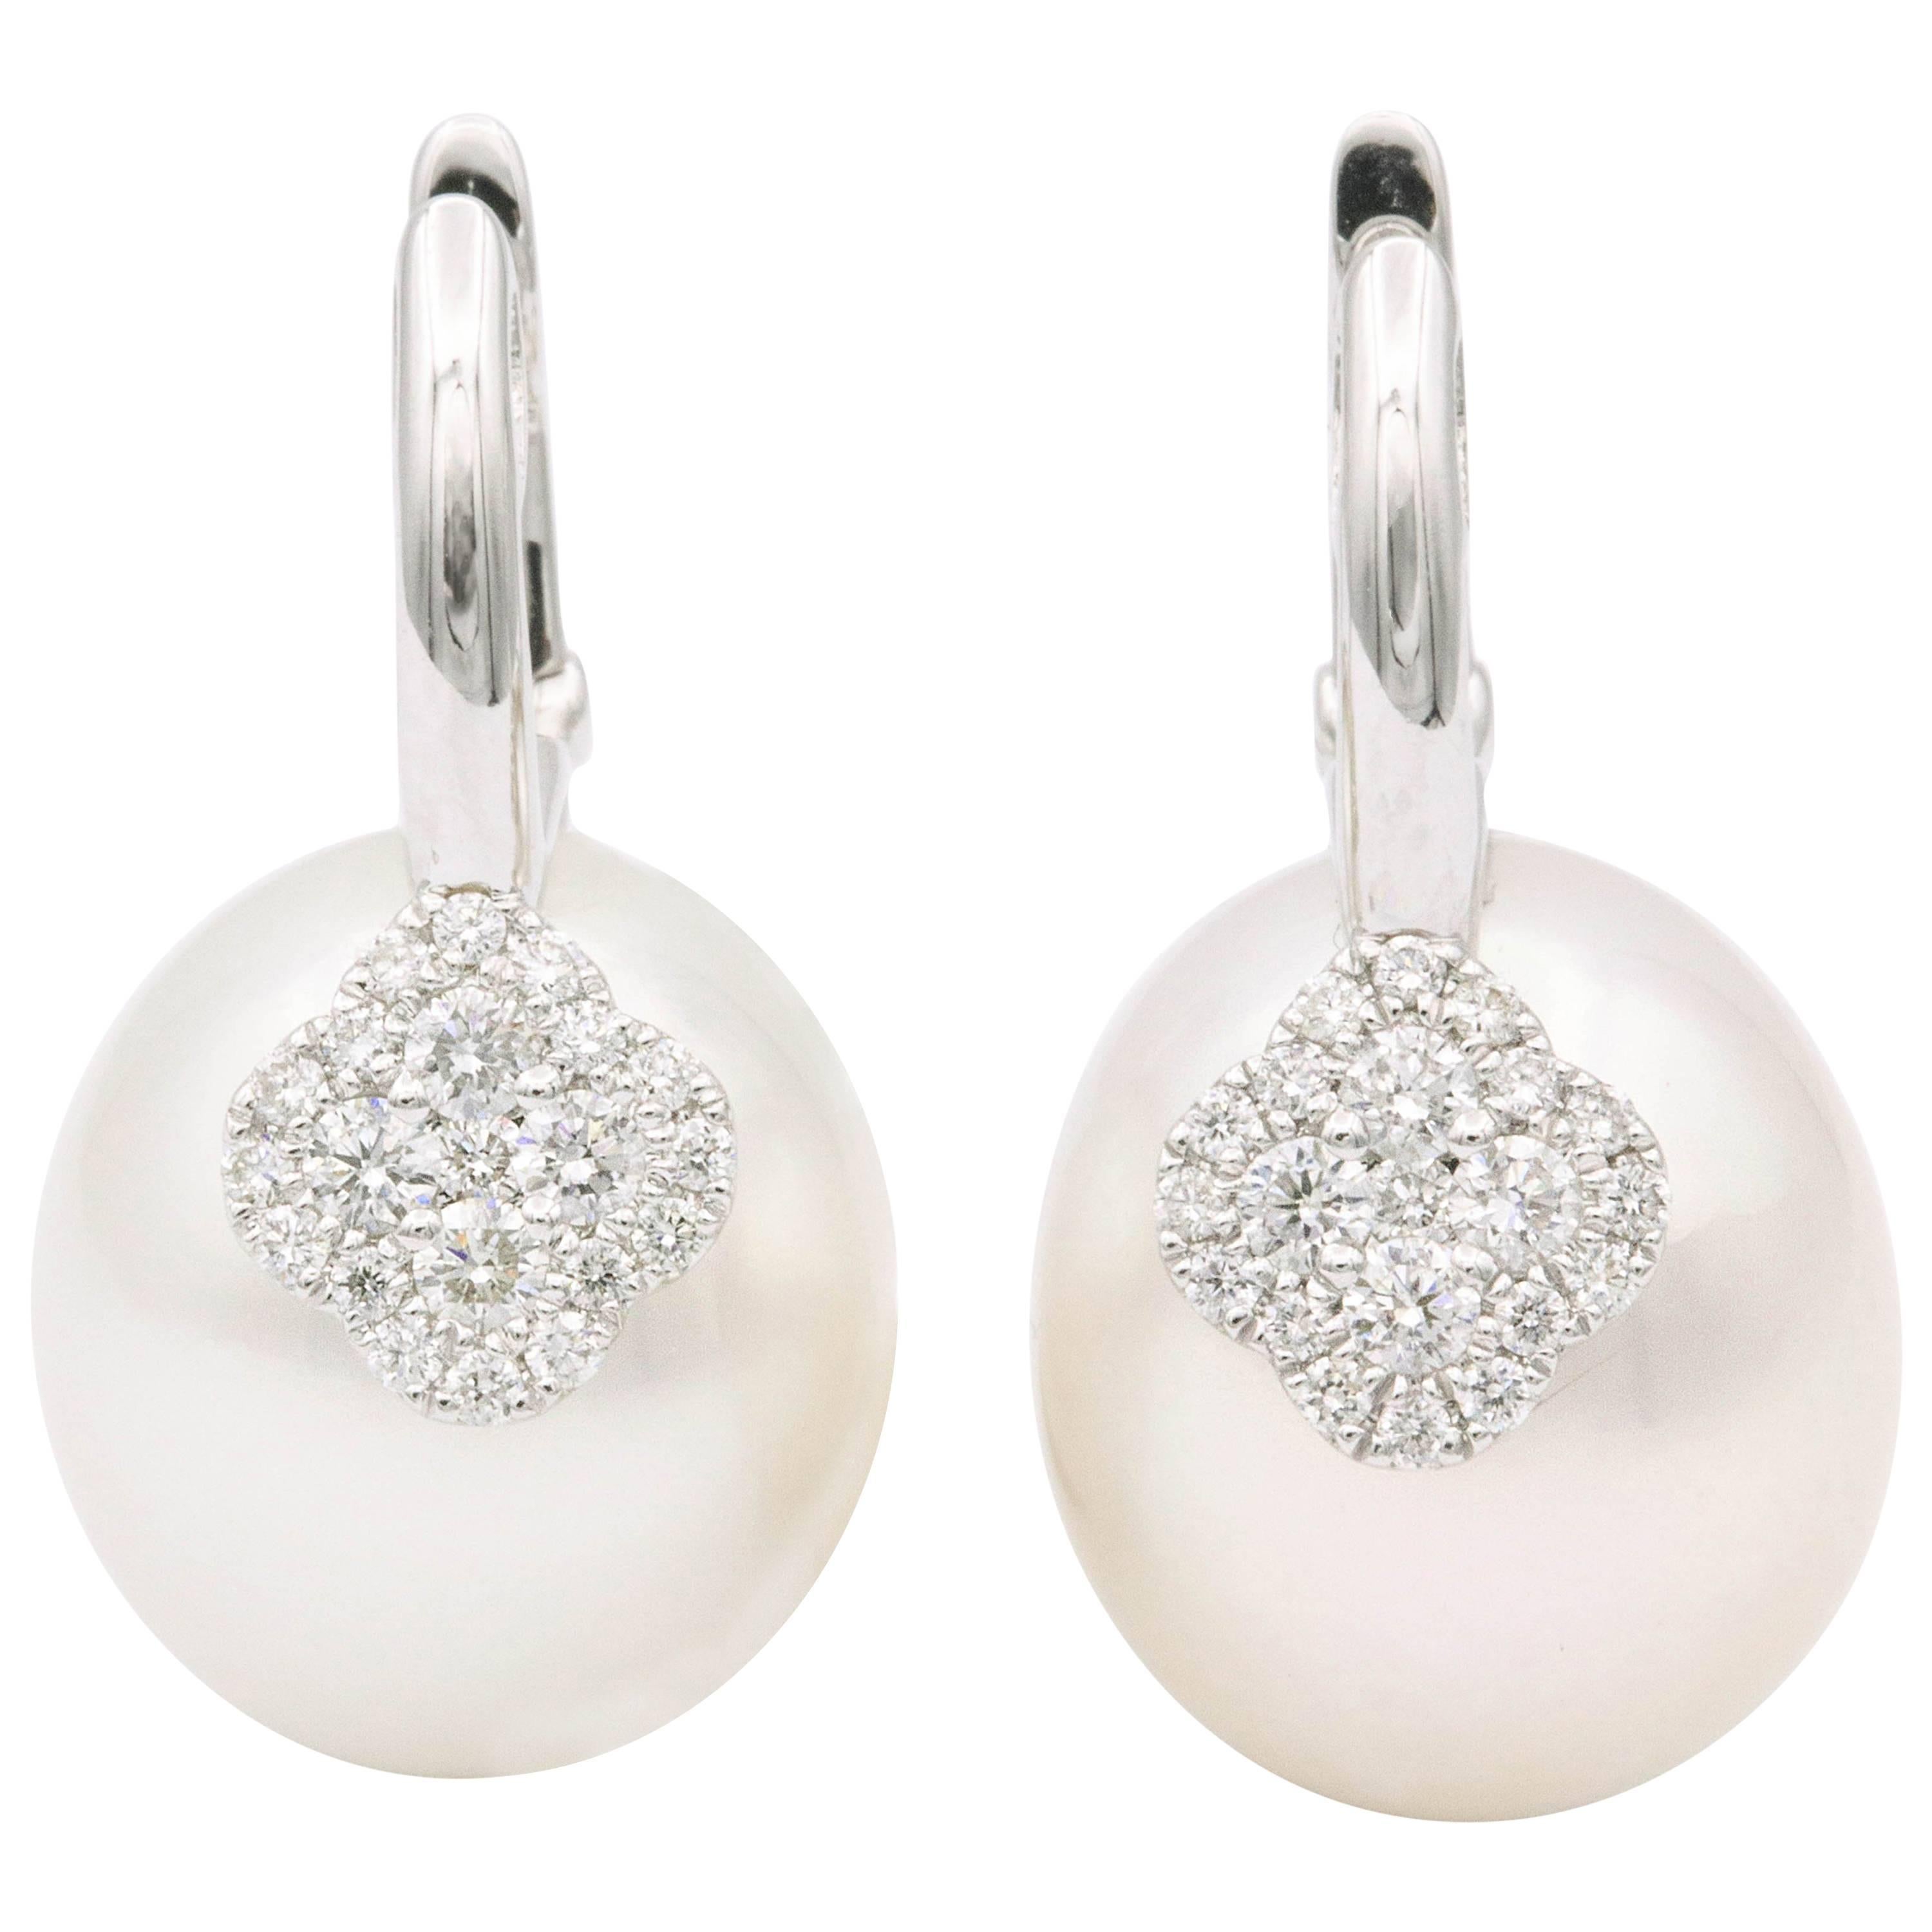 South Sea Pearl Oval Shape Drop Earrings with Diamond Accent